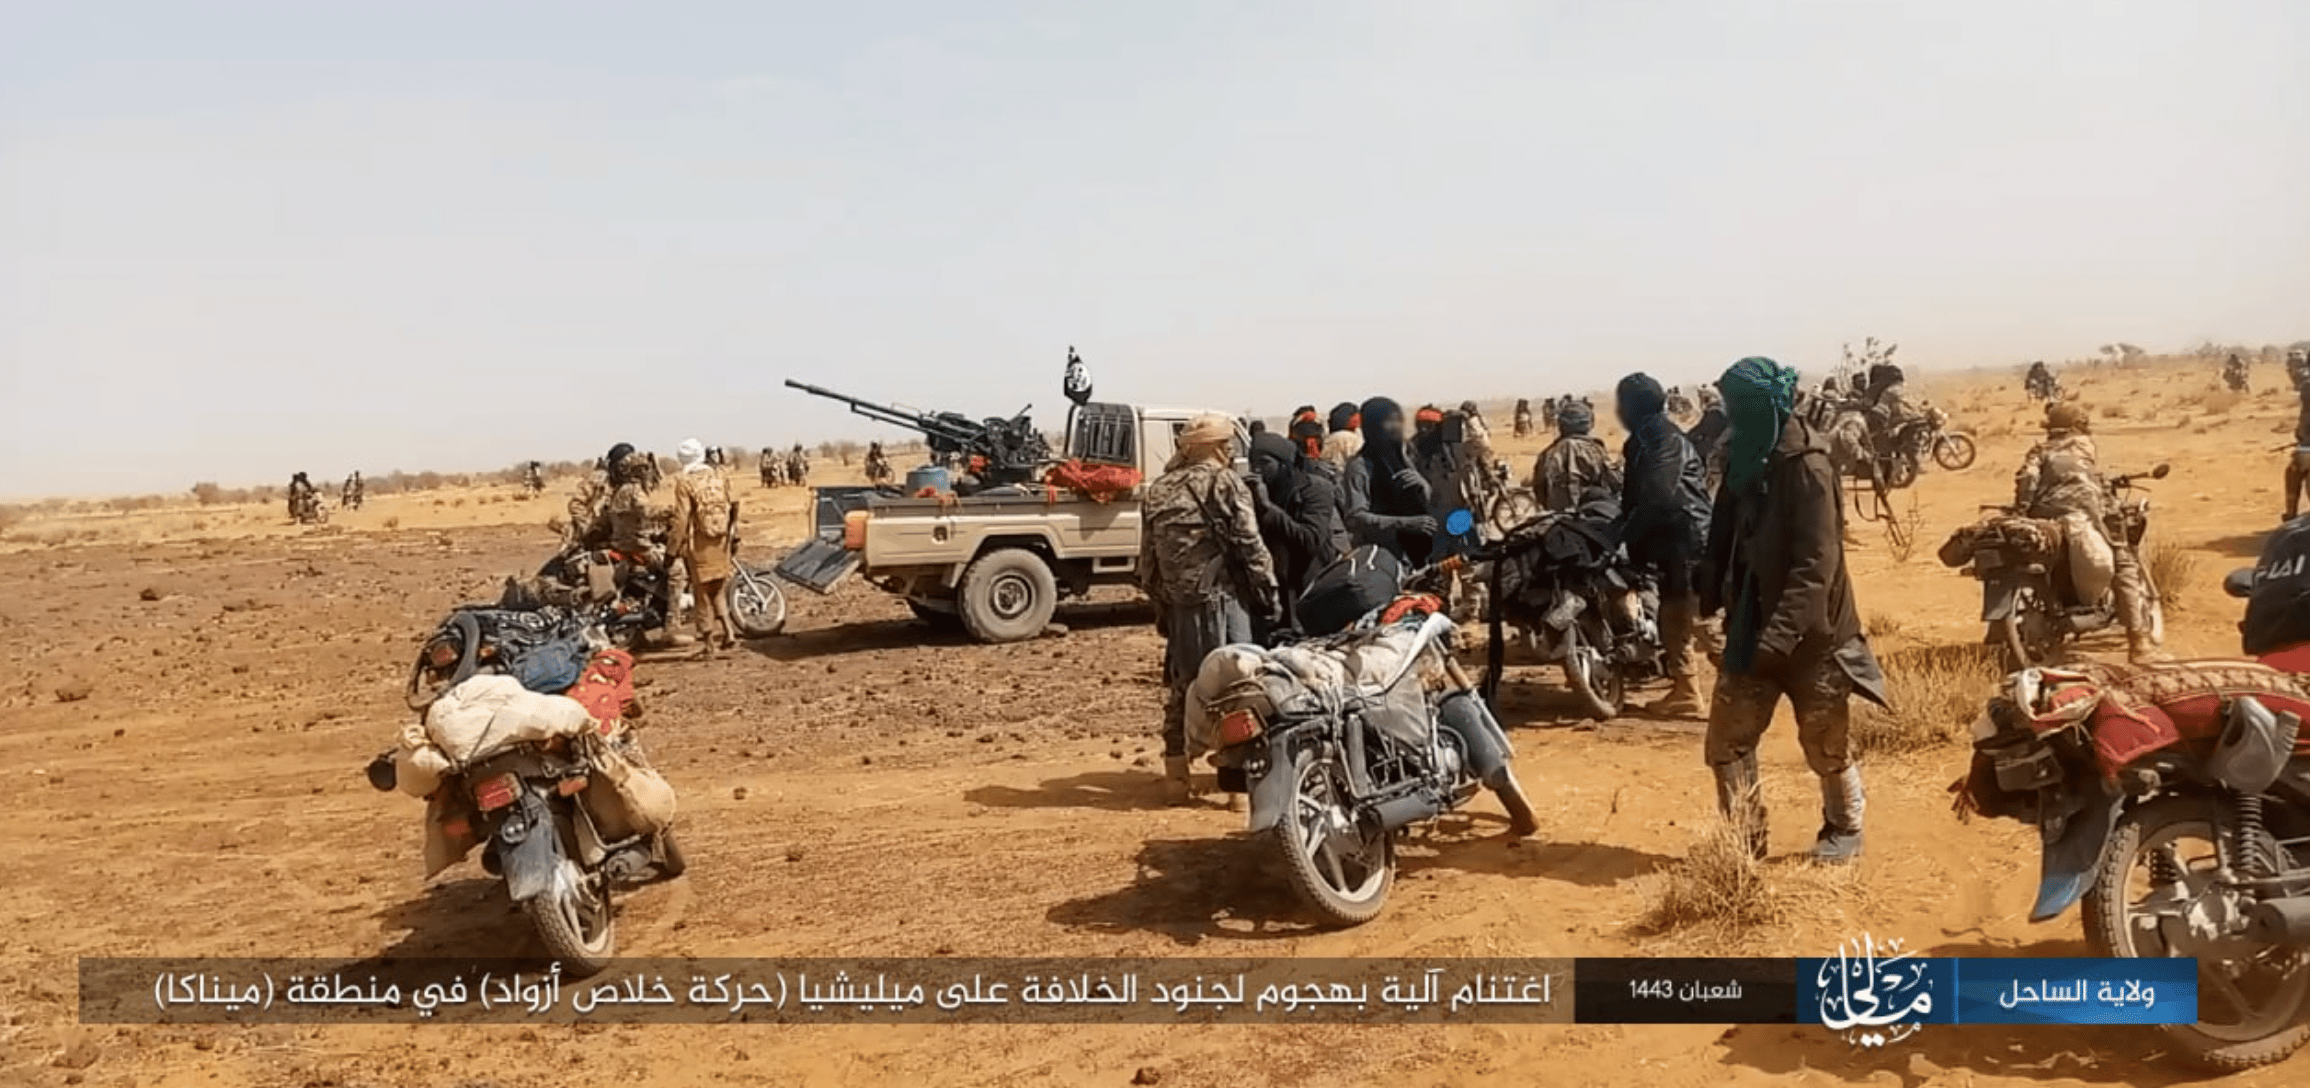 Islamic State Greater Sahara (ISGS) Fighters Celebrate in Broad Daylight After Armed Assault on Azawad Villages Tamalat and Insinane in Ménaka Region, Mali - 28 March 2022